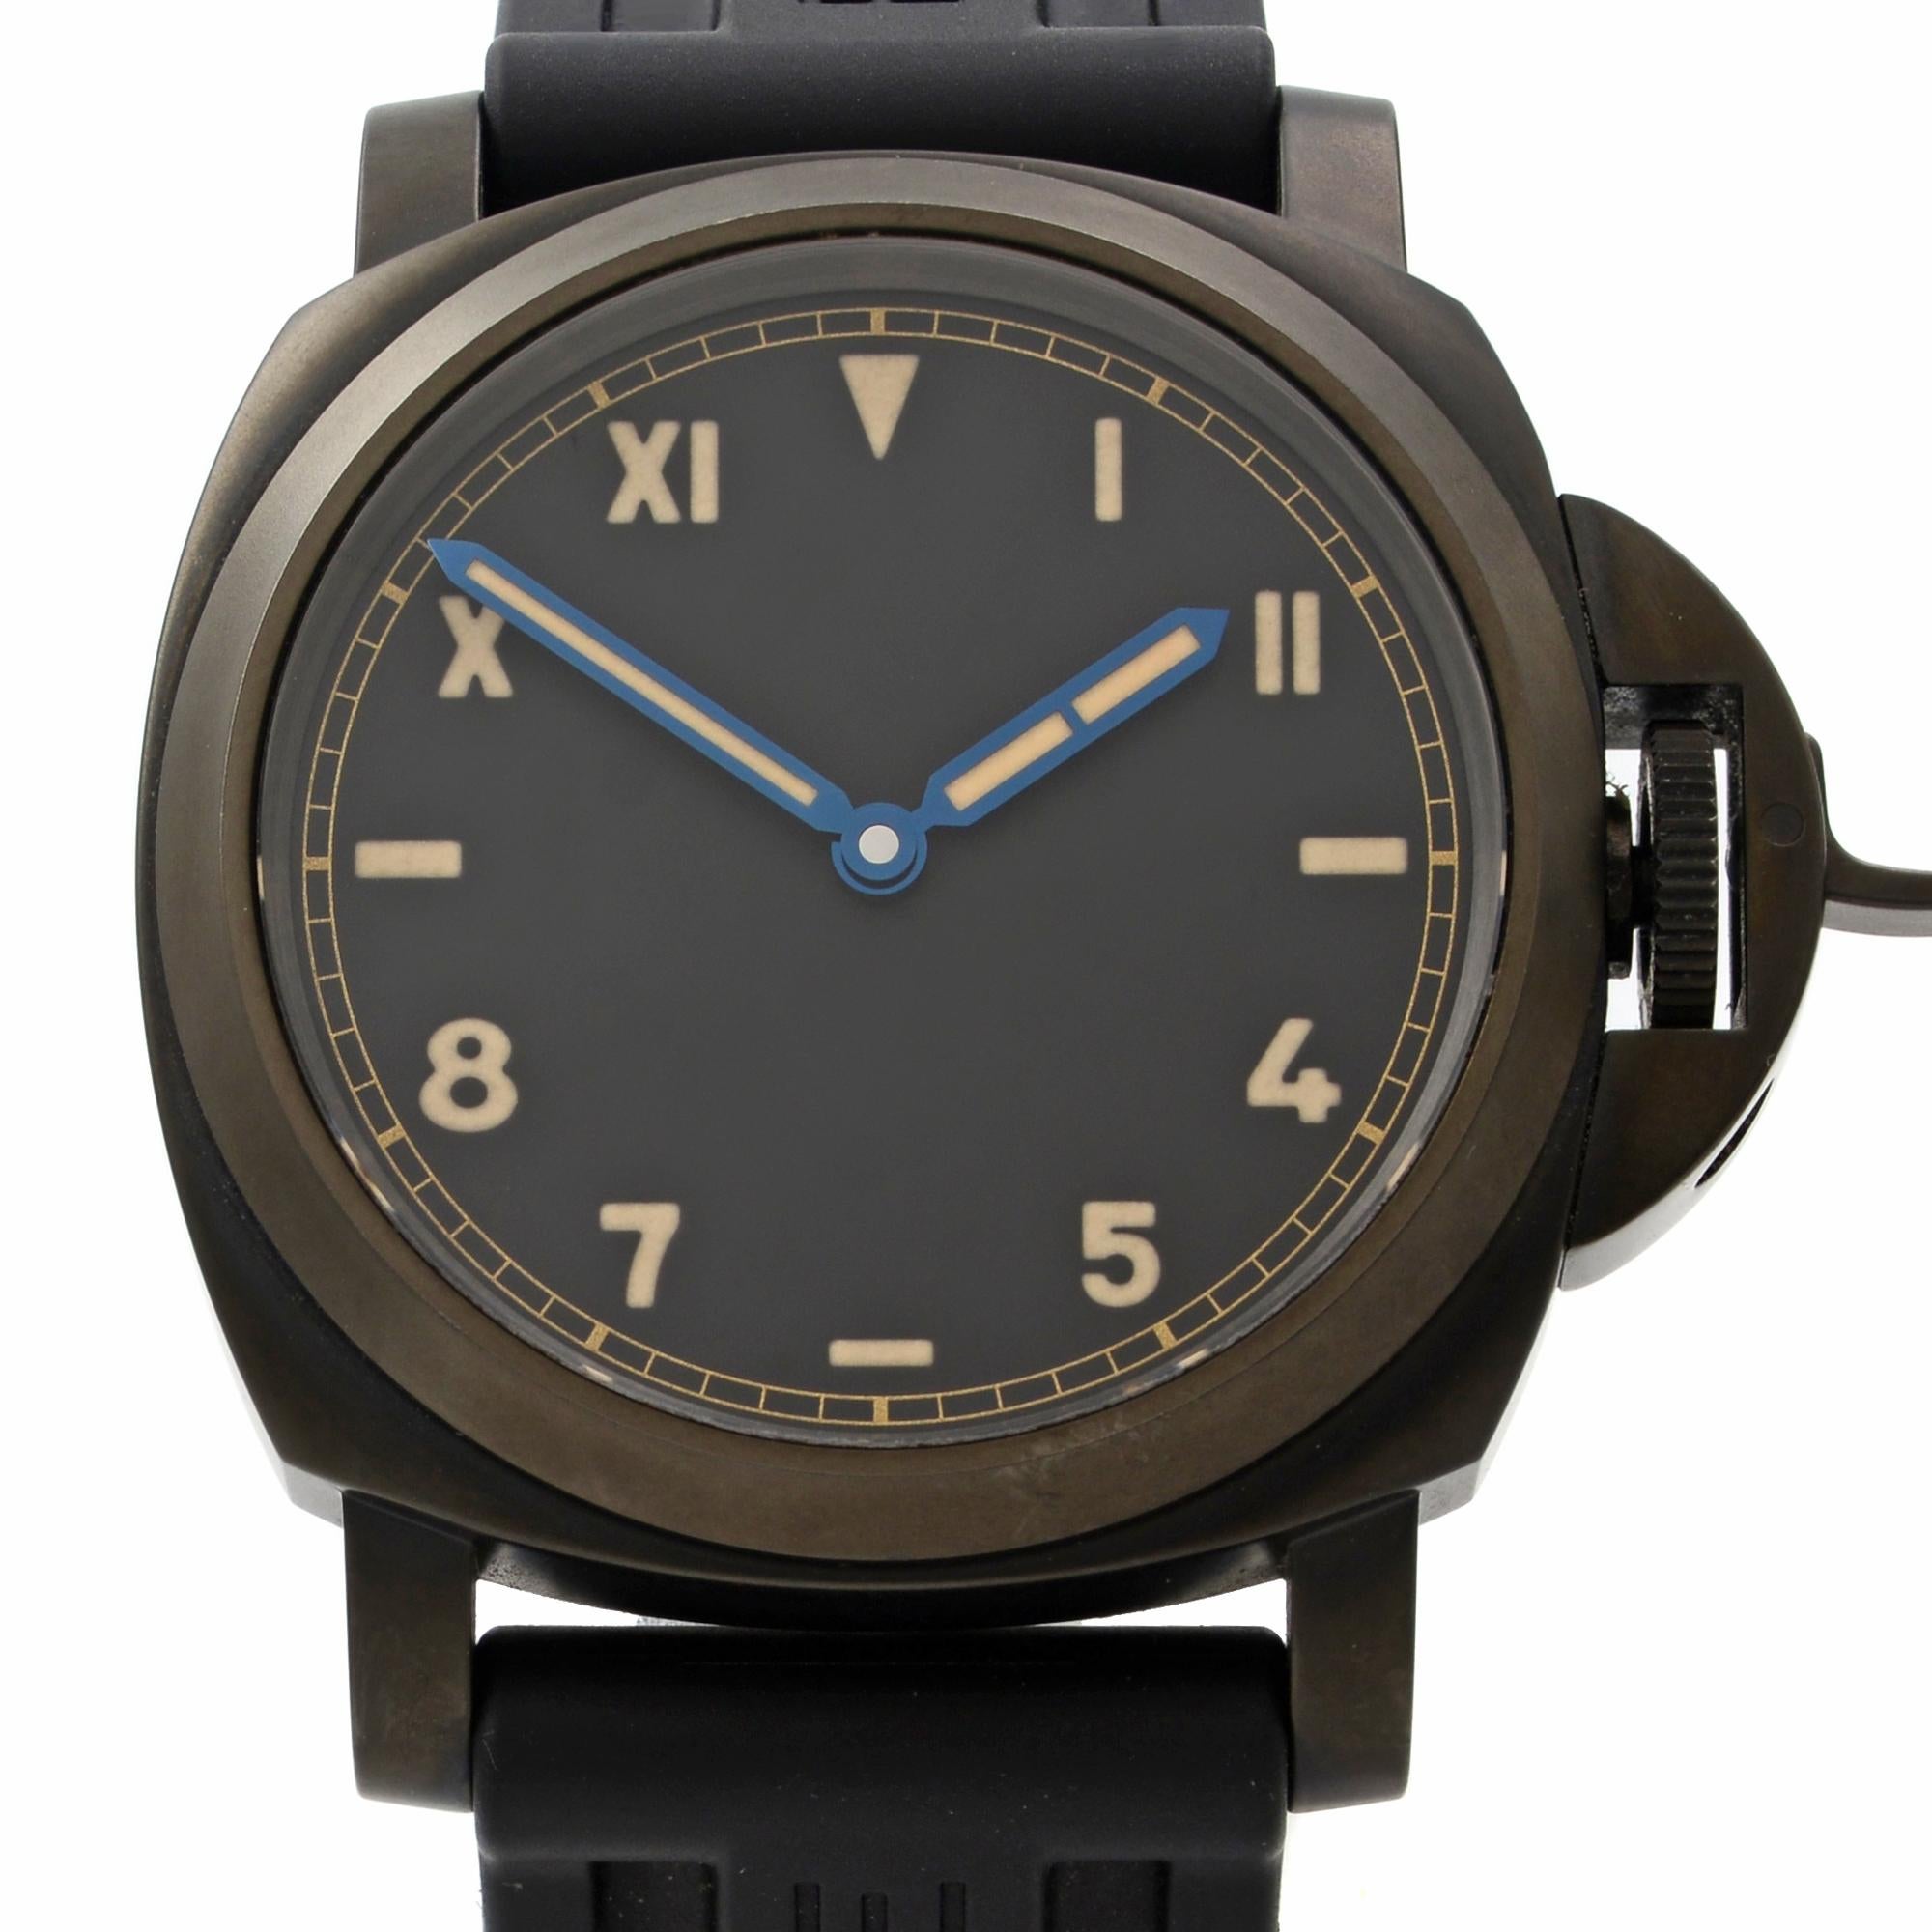 This pre-owned Panerai Luminor 1950 PAM00779 is a beautiful men's timepiece that is powered by mechanical (hand-winding) movement which is cased in a titanium case. It has a round shape face, no features dial and has hand arabic numerals, roman